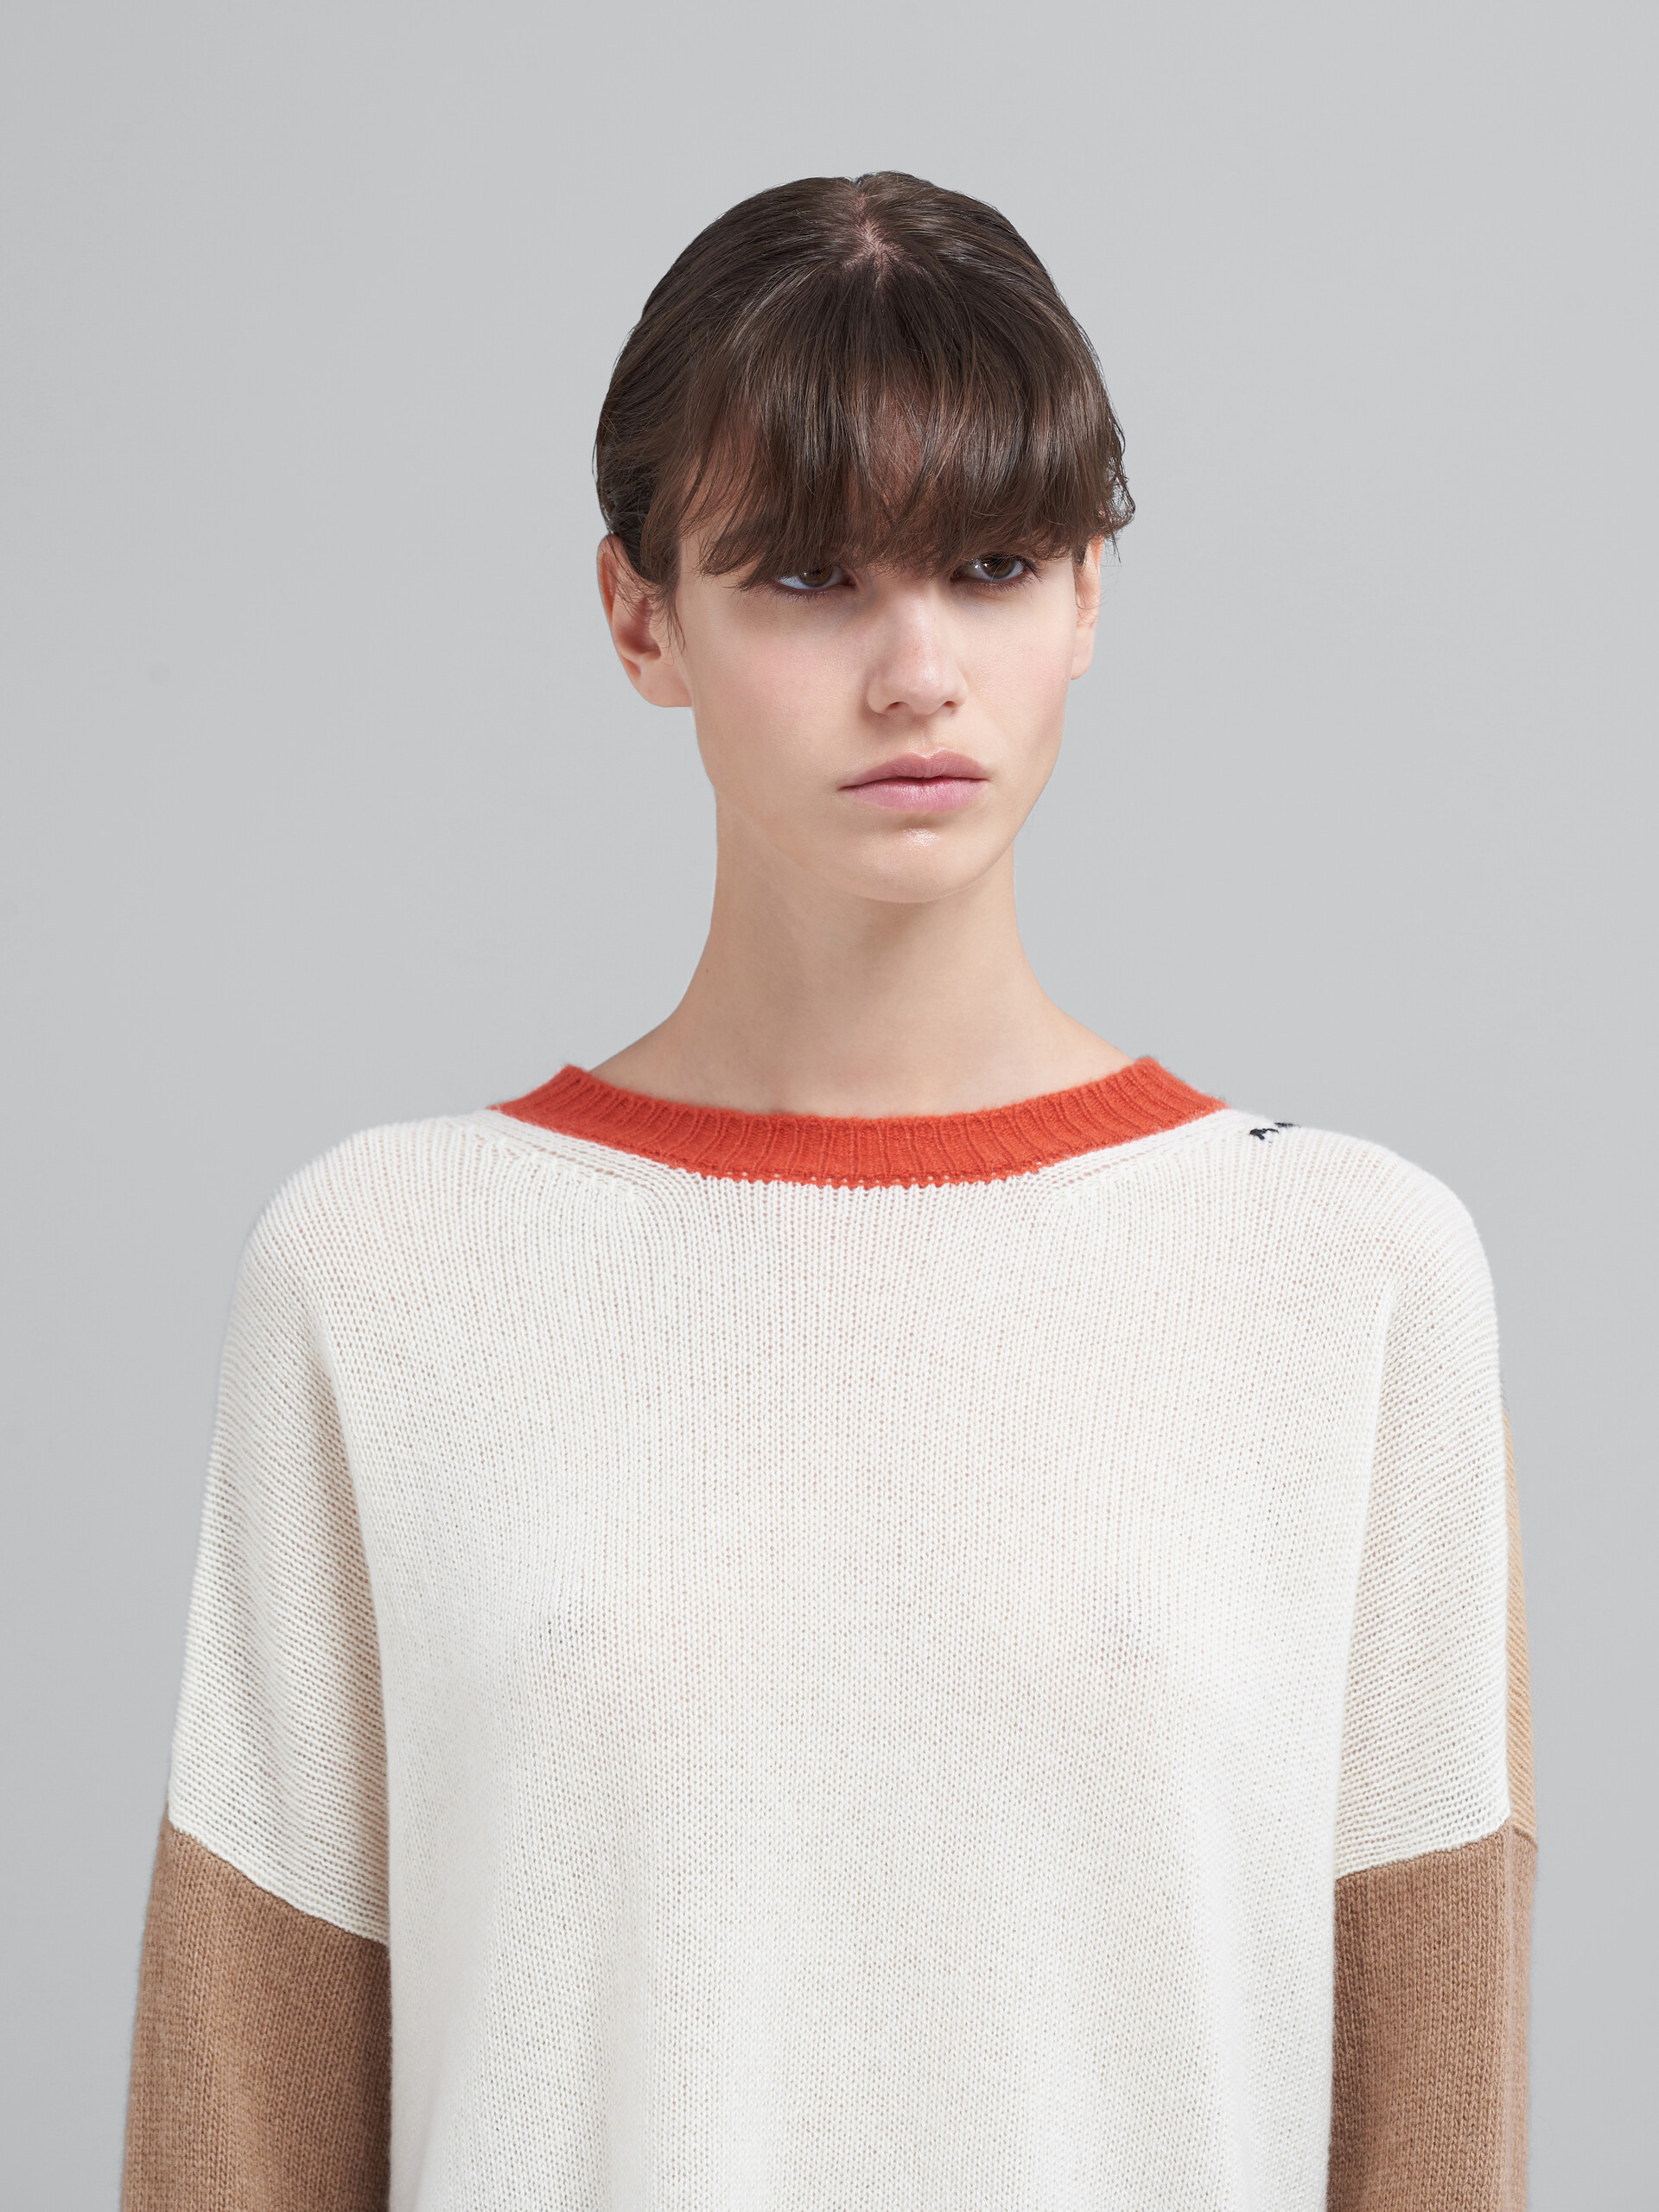 Iconic cashmere sweater - Pullovers - Image 4